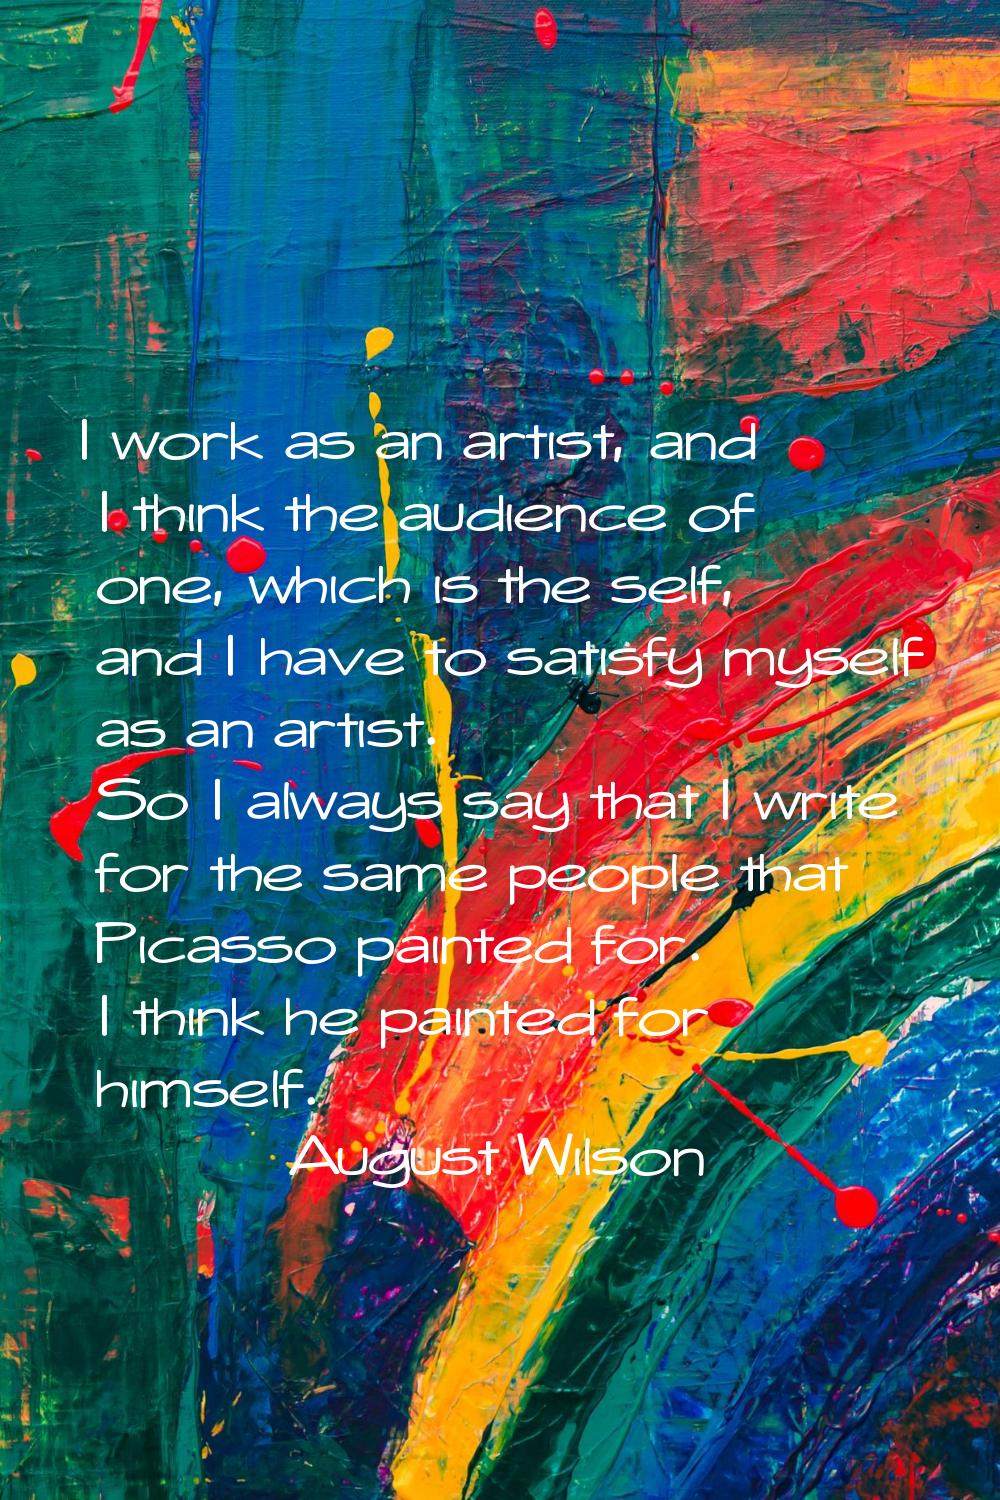 I work as an artist, and I think the audience of one, which is the self, and I have to satisfy myse